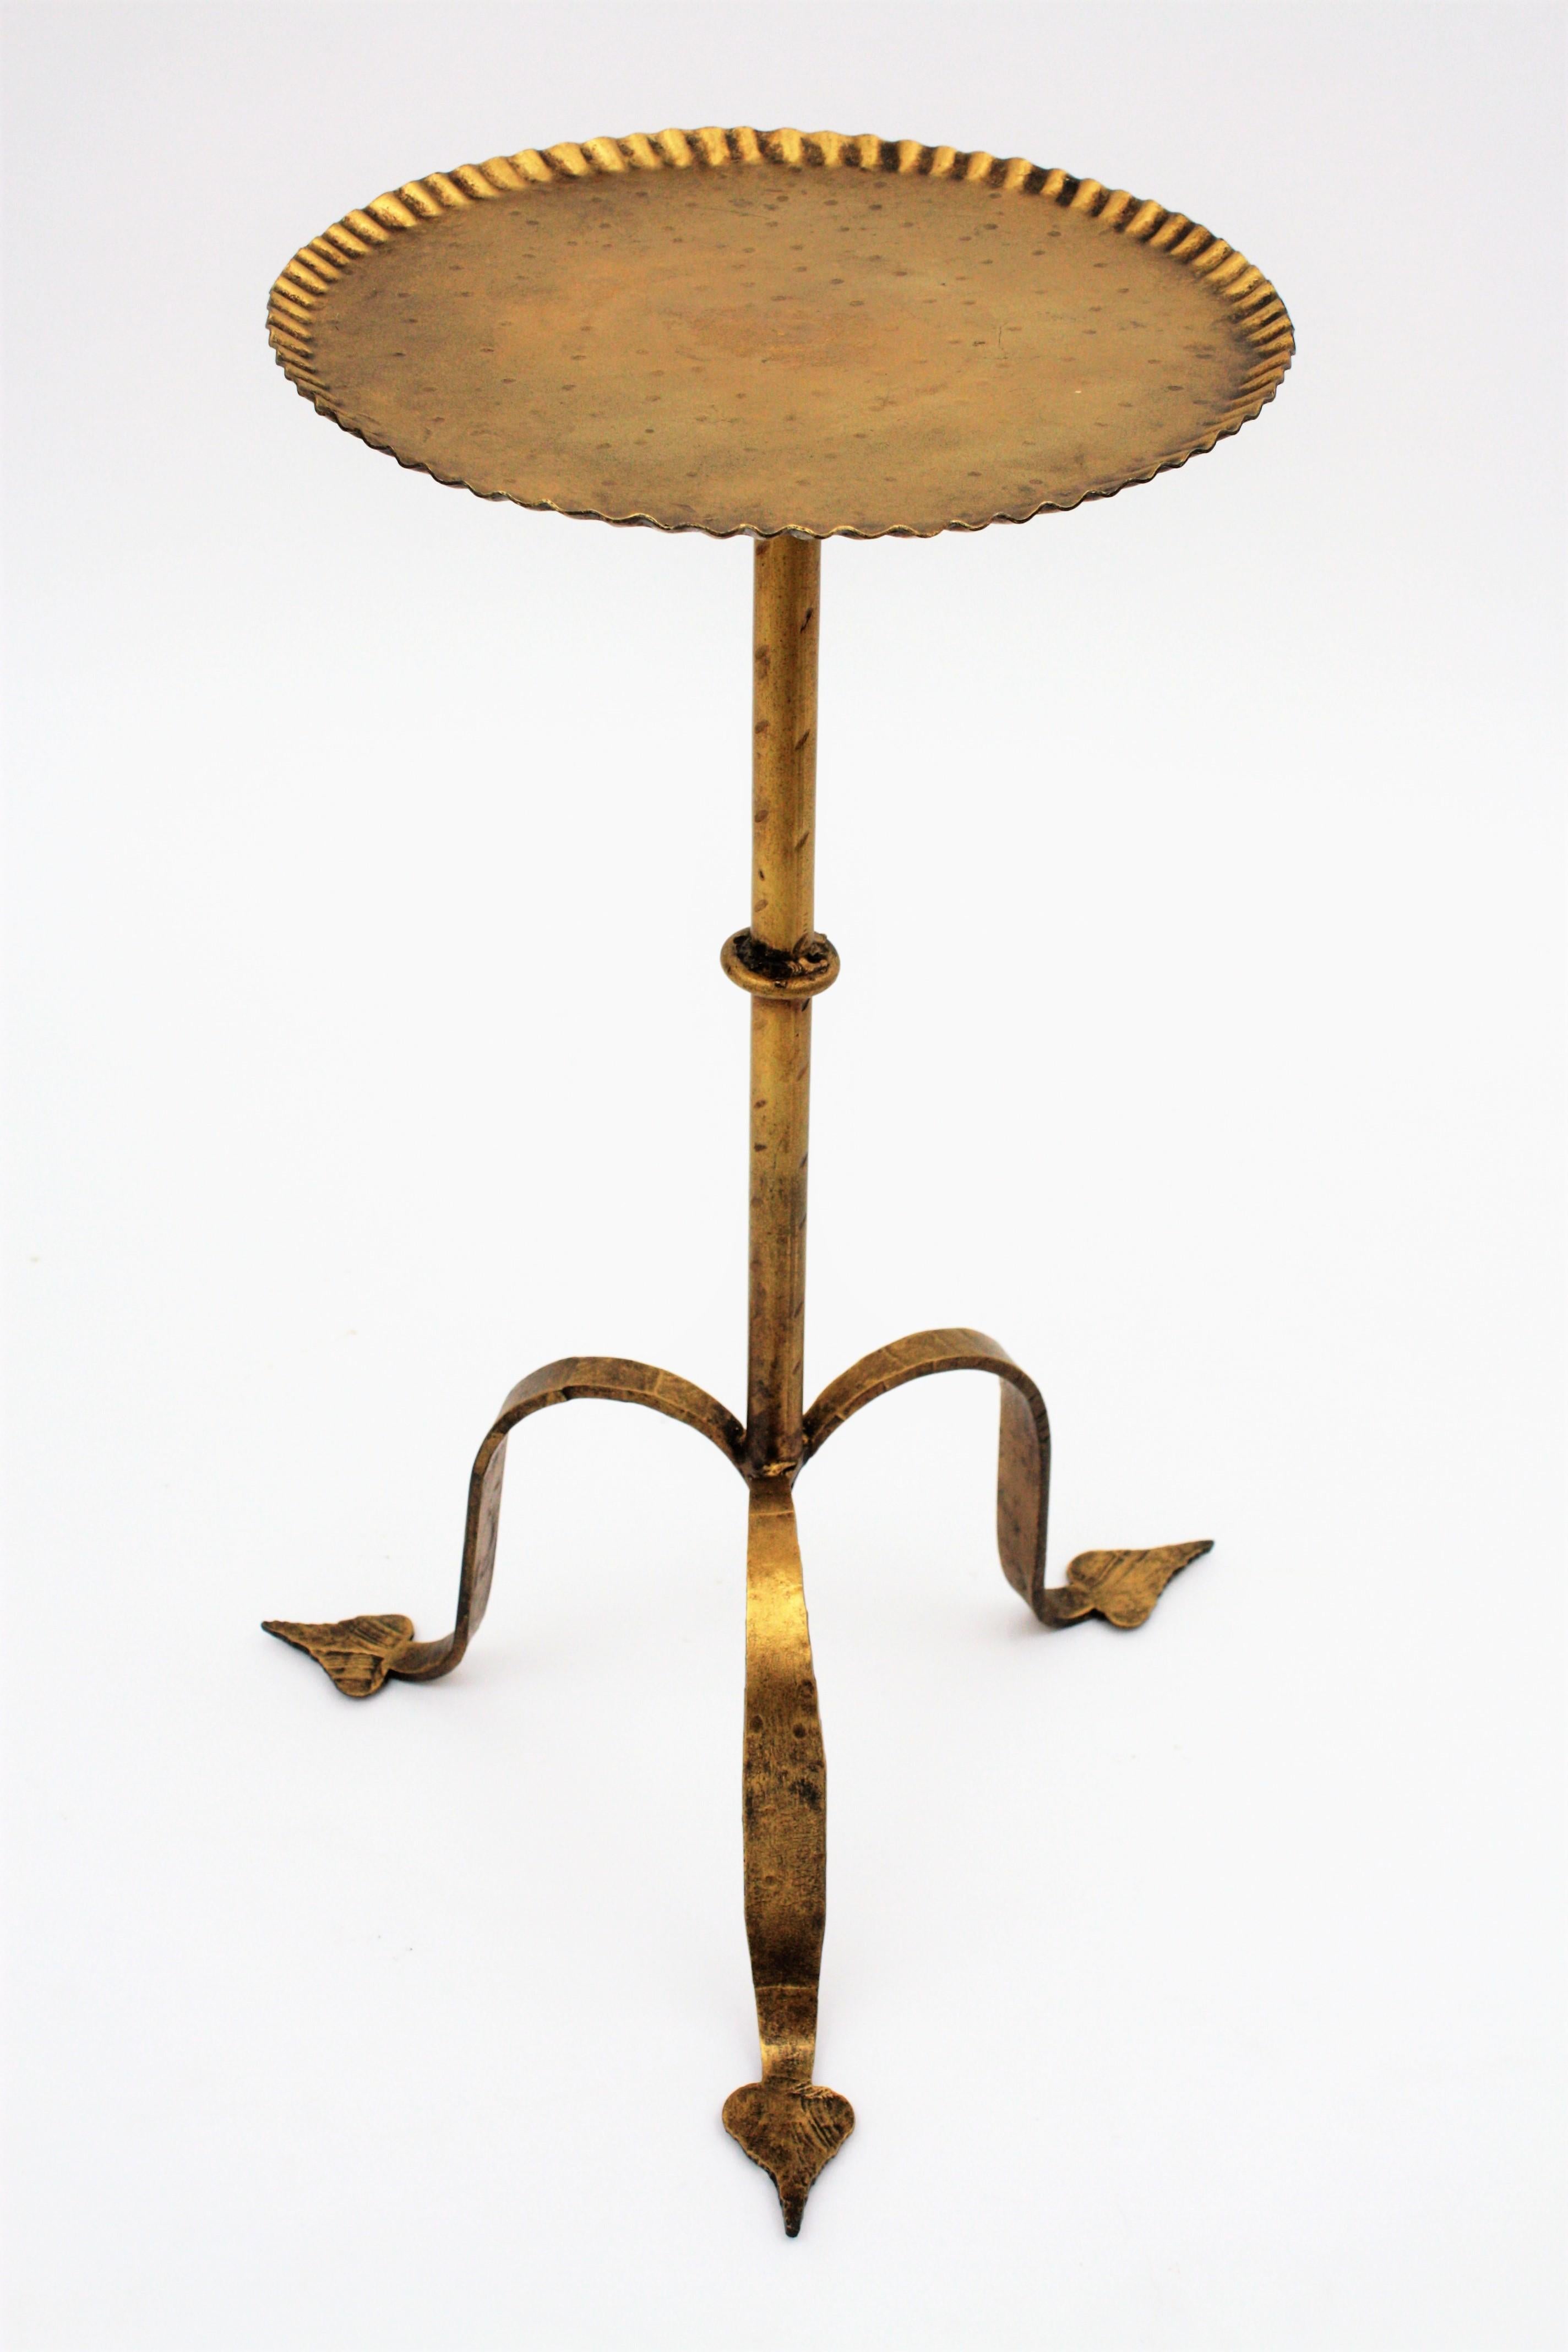 Mid-Century Modern Spanish Gilt Iron Drinks Table Gueridon Side Table or Stand with Scalloped Rim